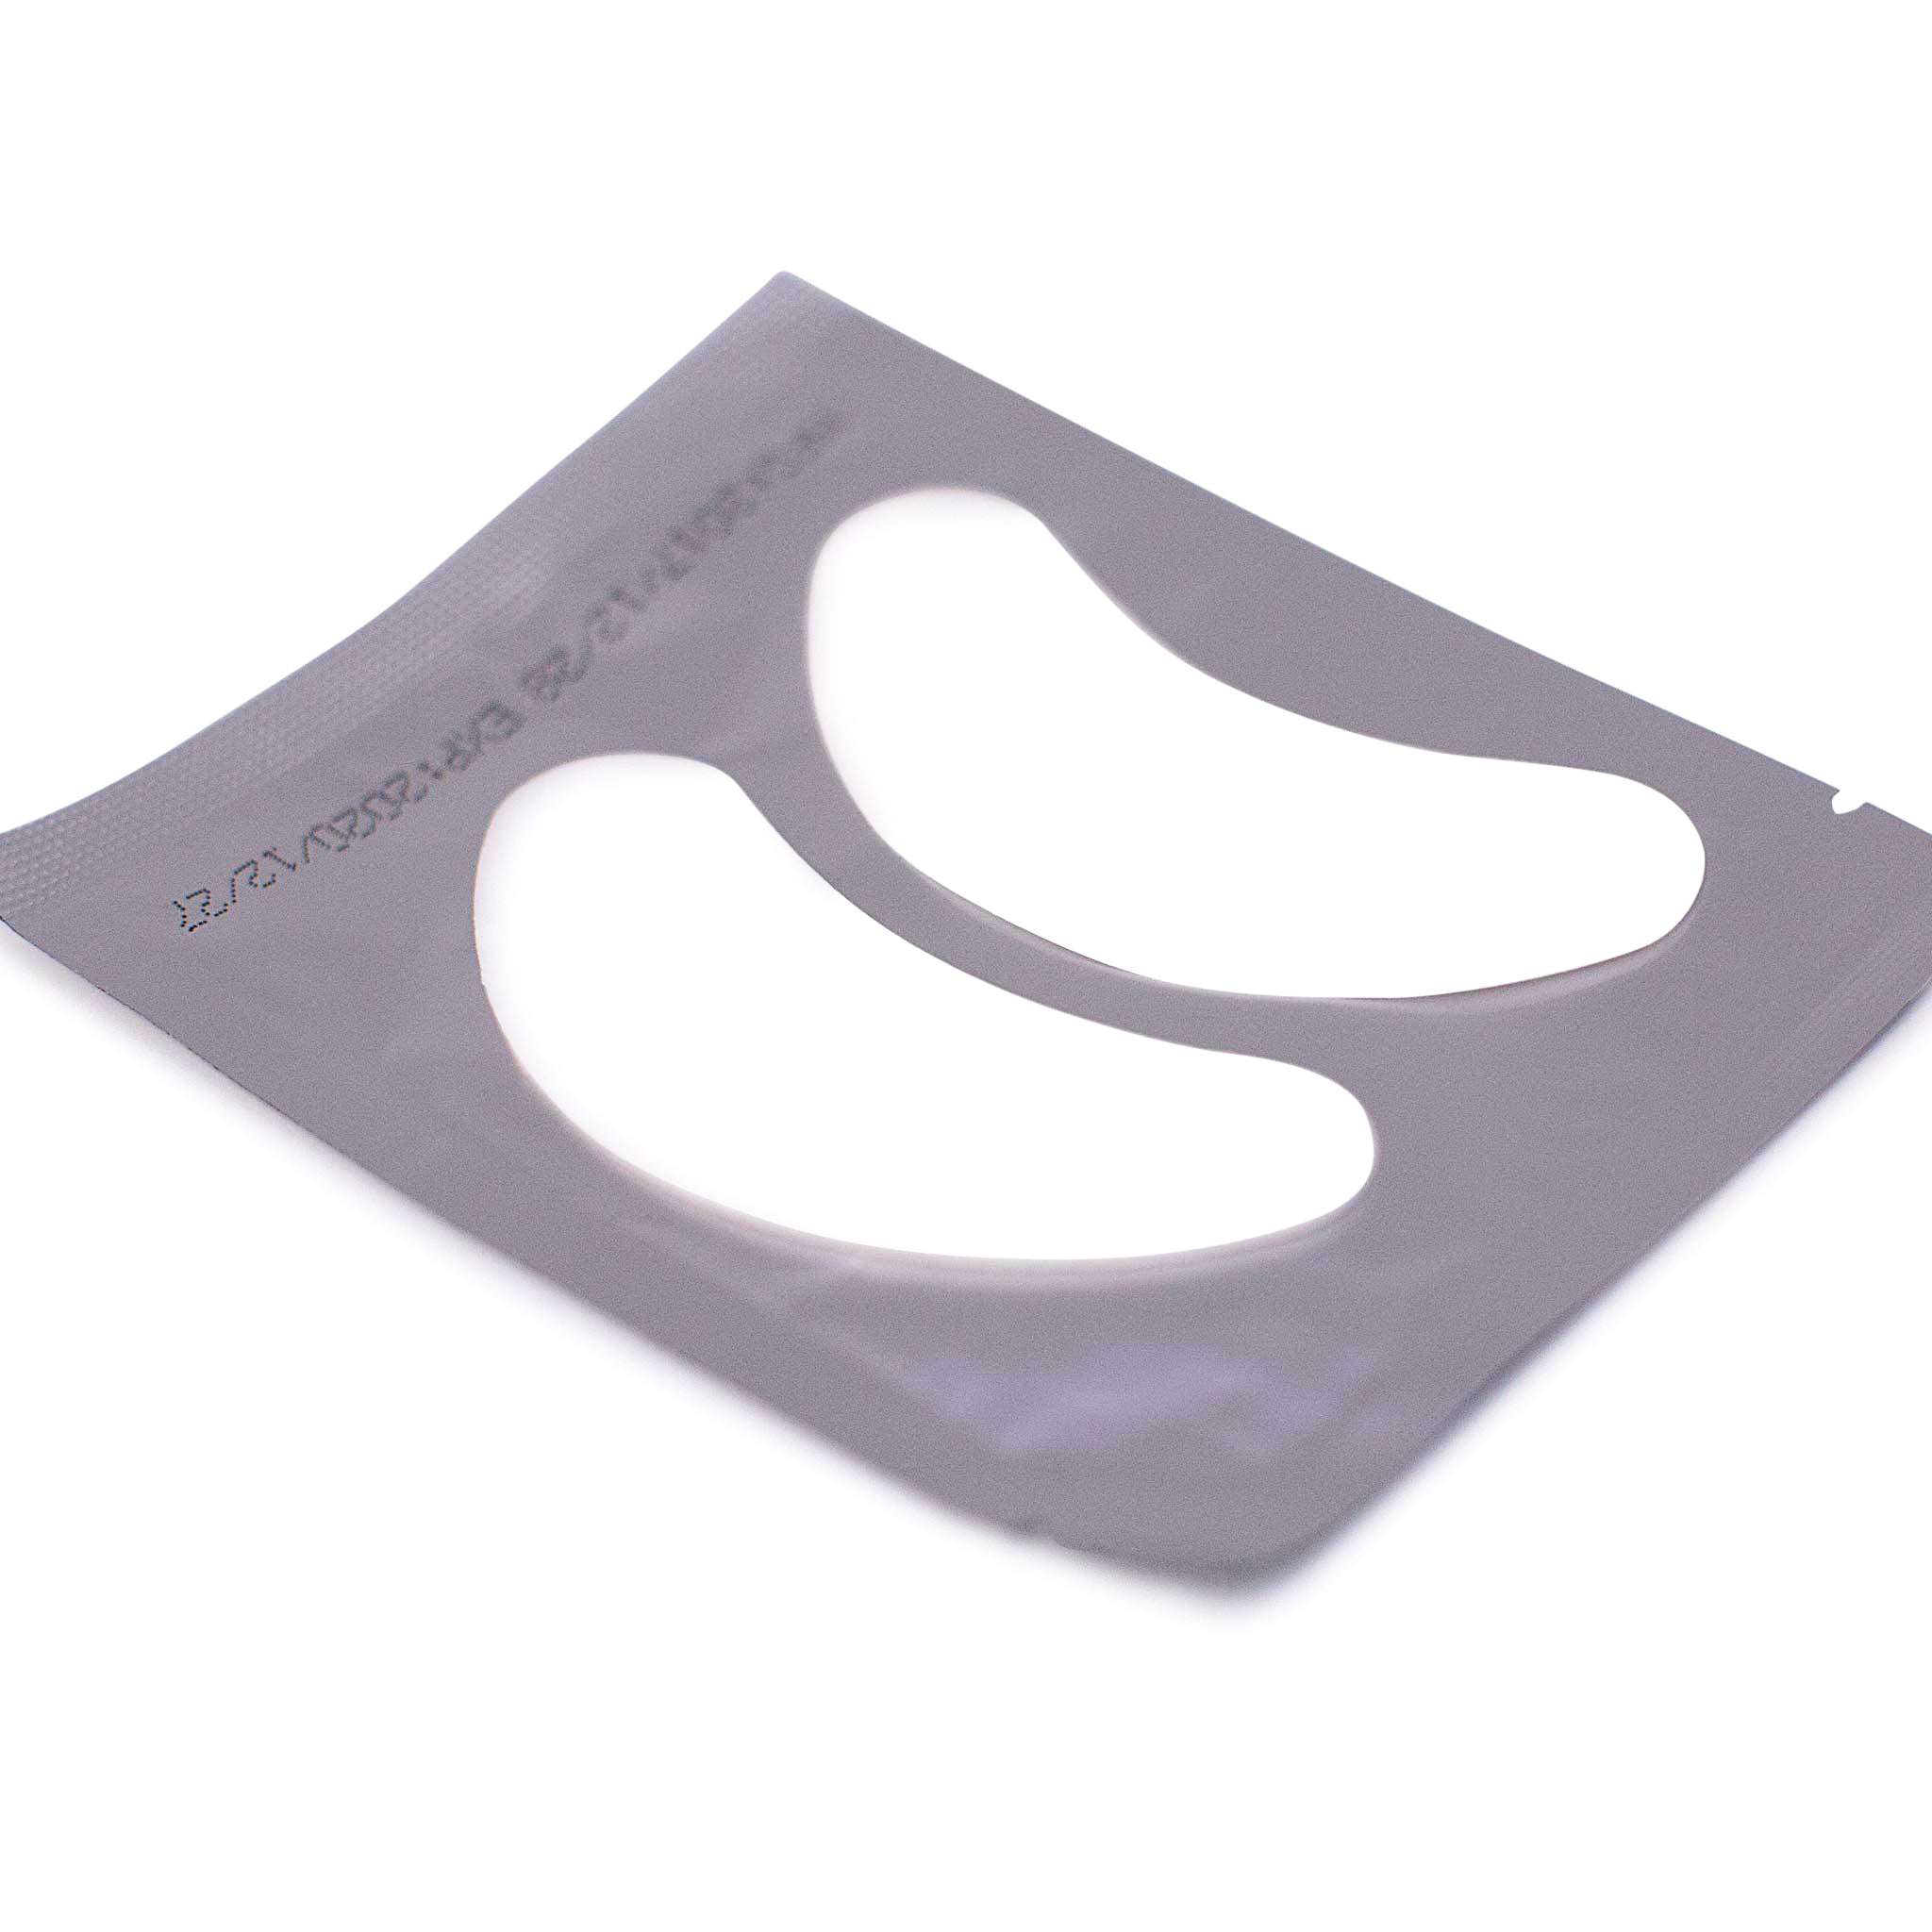 eye patch for eyelash extensions, lash extension eye pads, under eye patches, gel patches for lash extensions